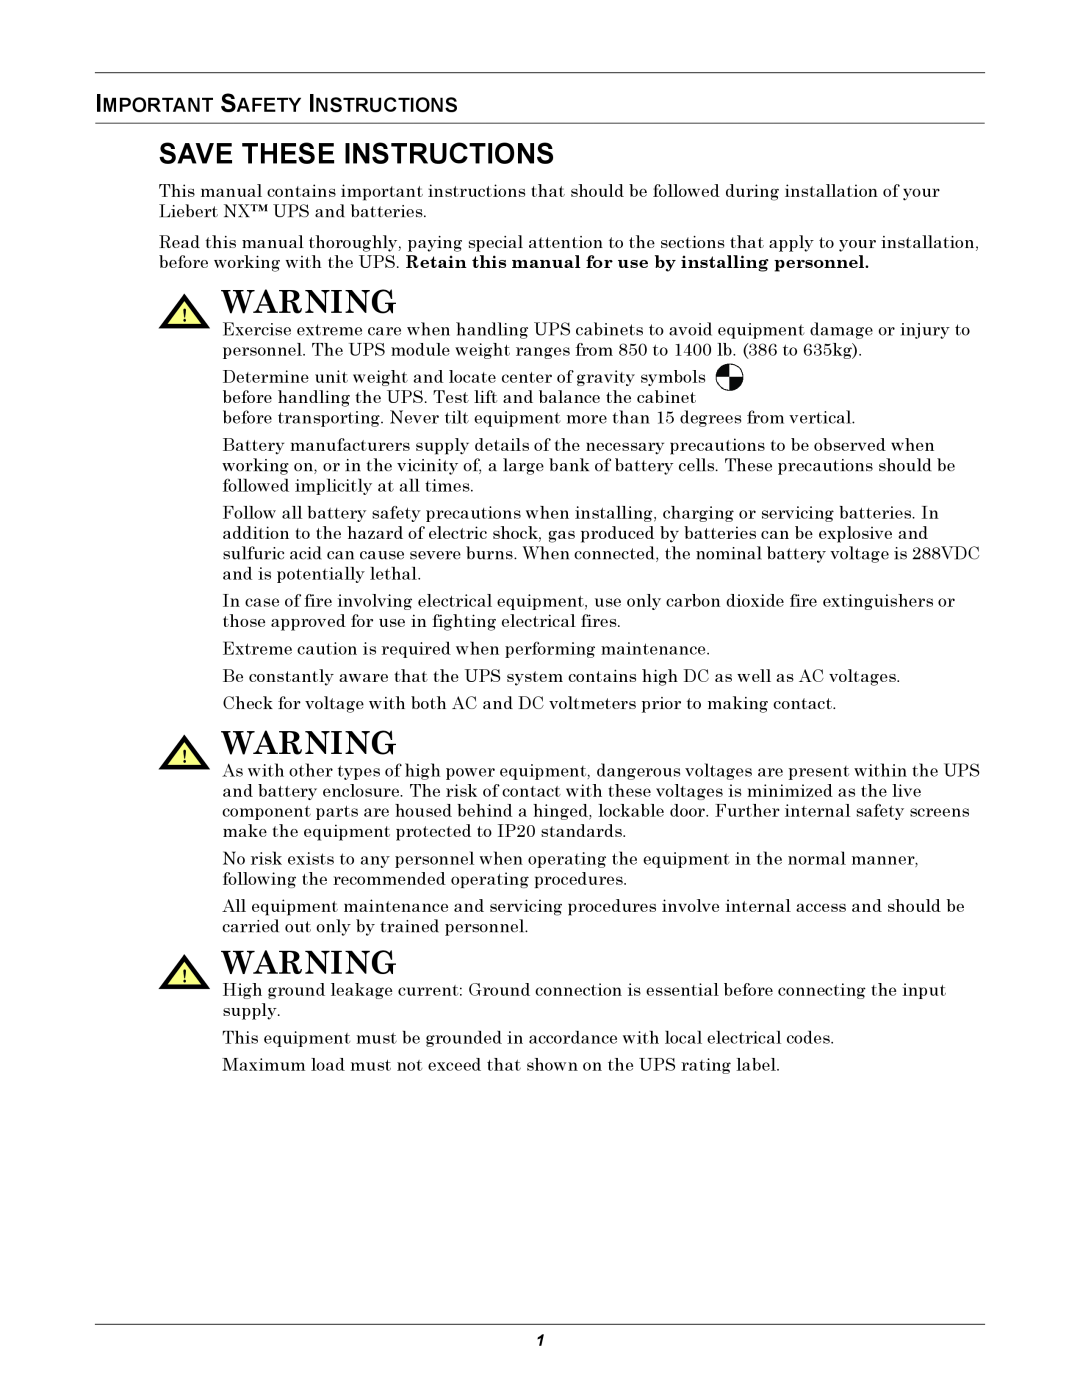 Emerson 208V, 10-30kVA installation manual Save These Instructions, Important Safety Instructions 